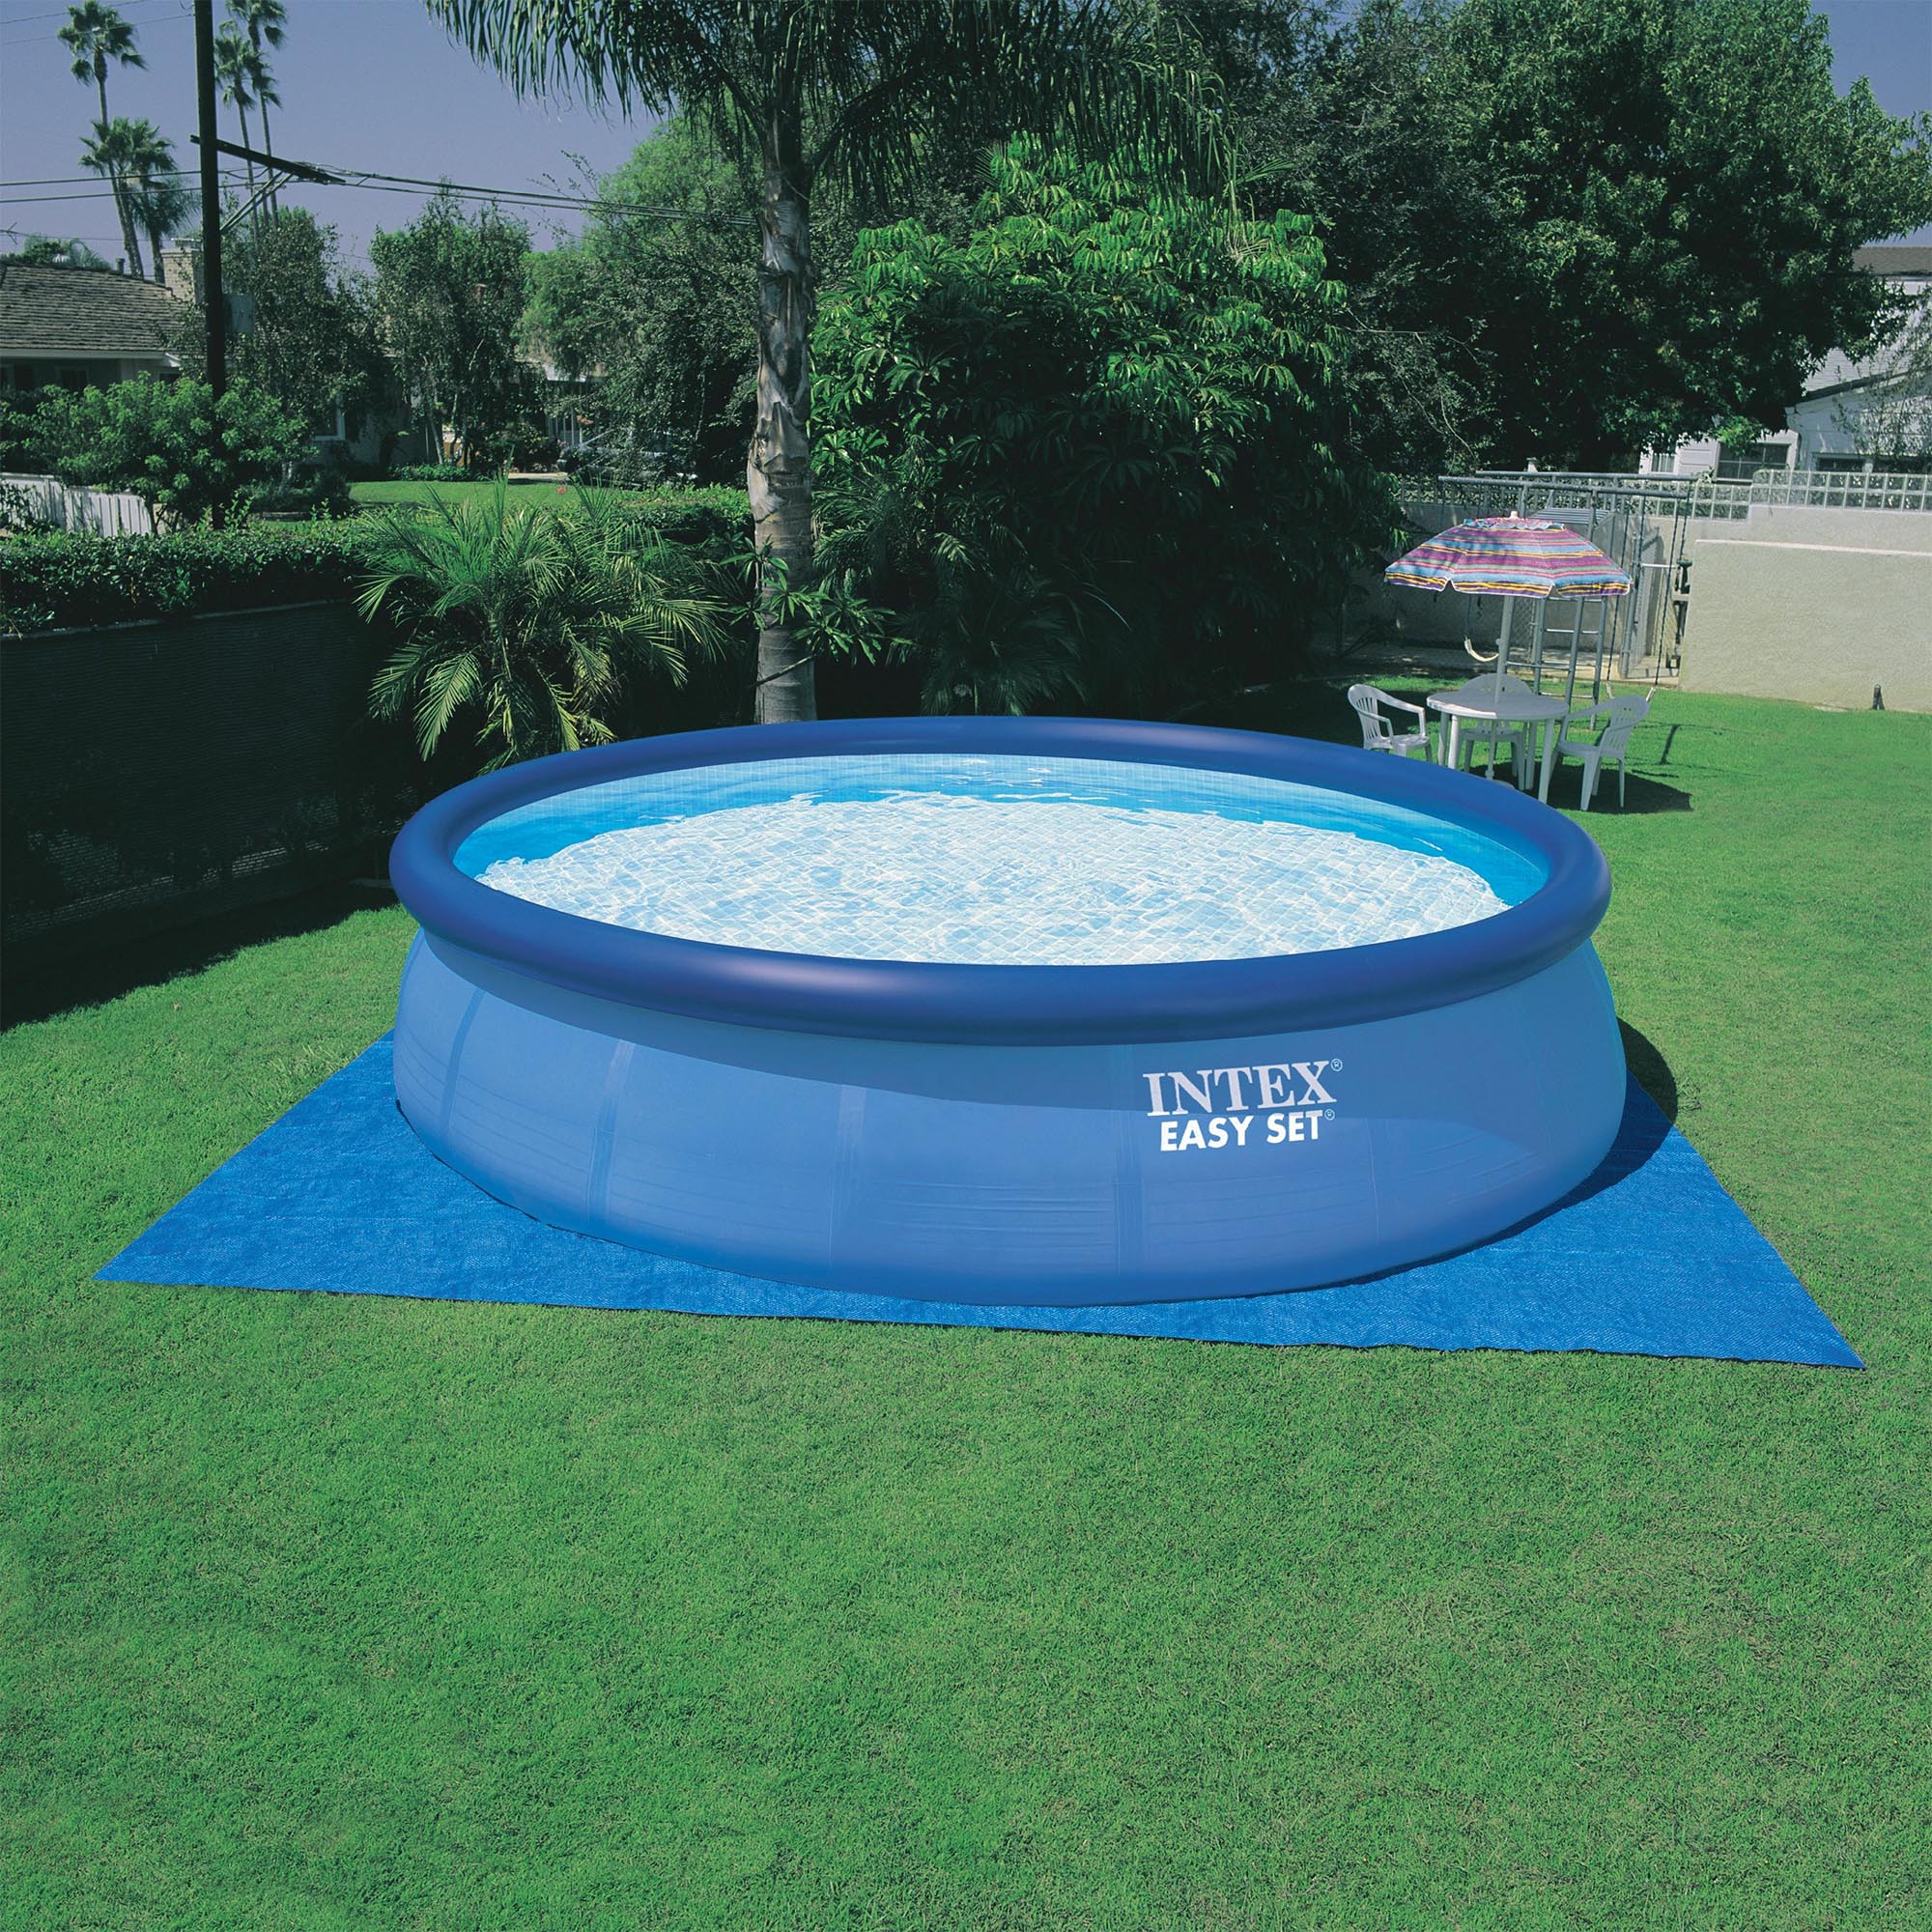 【Free Expedited Delivery】Large Swimming Pool Set for Whole Family with Filter Pump for Summer Water Party Outdoor Backyard Garden Easy Set Full-Size Inflatable Above Ground Pool15ft 